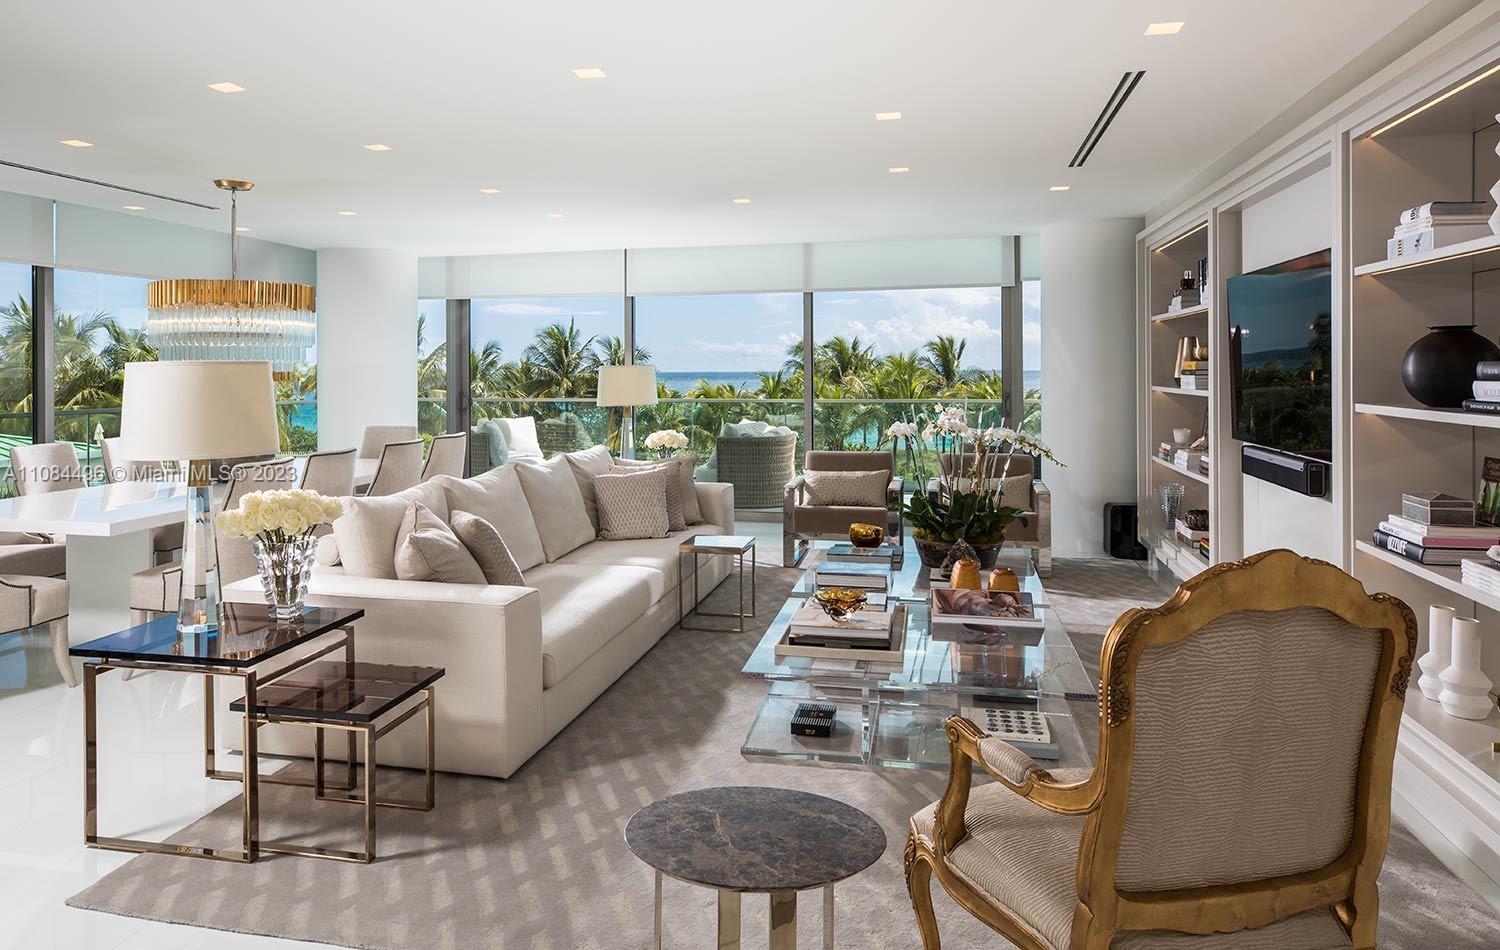 Oceana Bal Harbour  2 bedroom 2 1/2 baths, recently remodeled, corner unit ready to move in. Profess